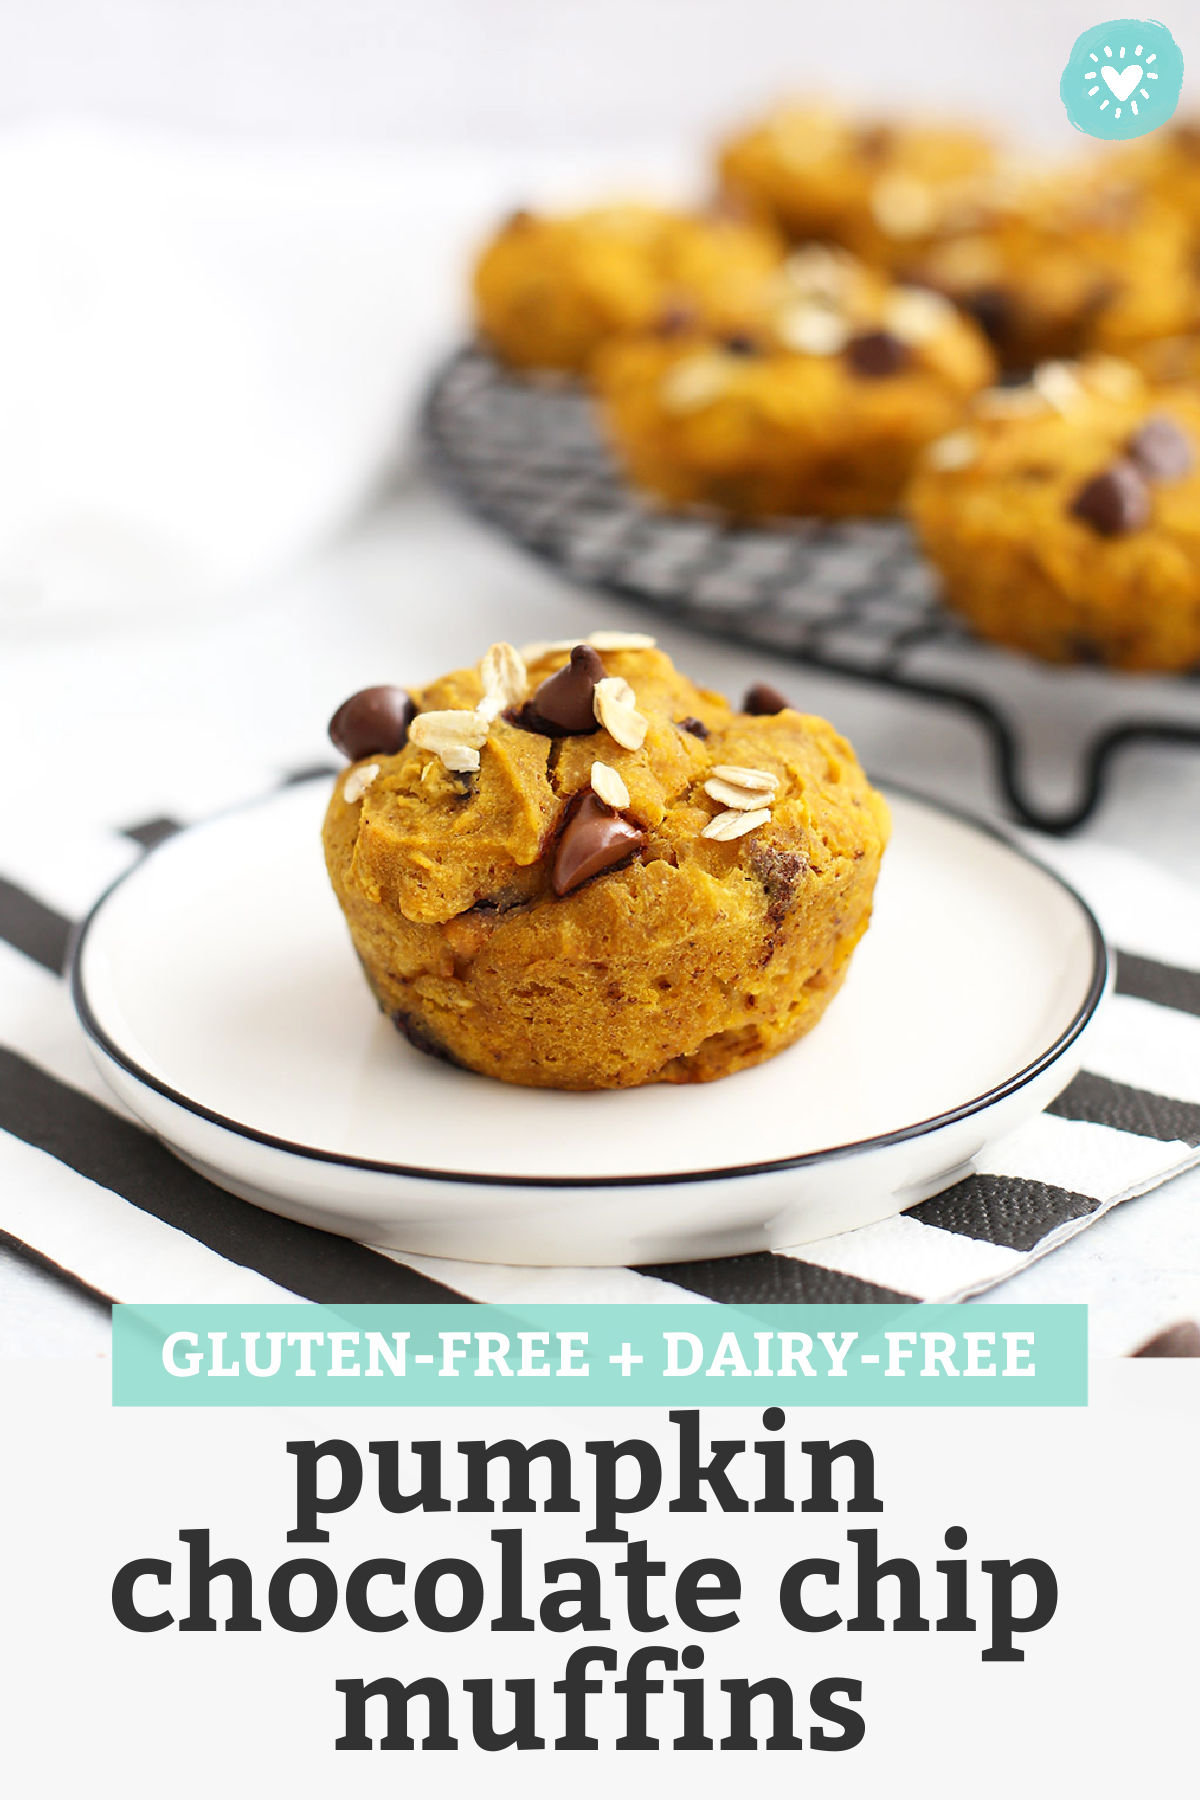 Gluten Free Pumpkin Chocolate Chip Muffin on a white plate with text overlay that reads "Gluten-Free Dairy-Free Pumpkin Chocolate Chip Muffins"